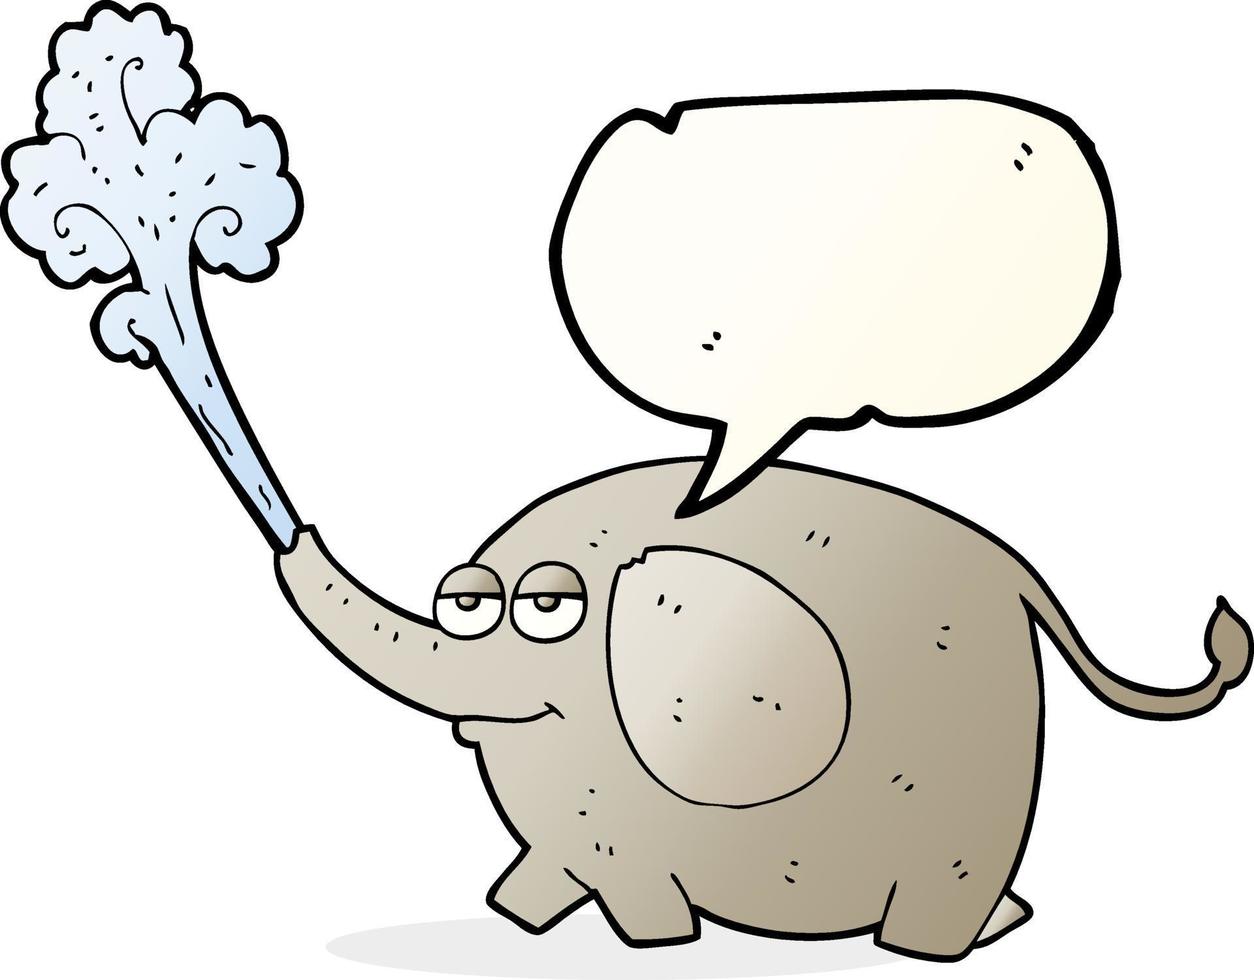 freehand drawn speech bubble cartoon elephant squirting water vector